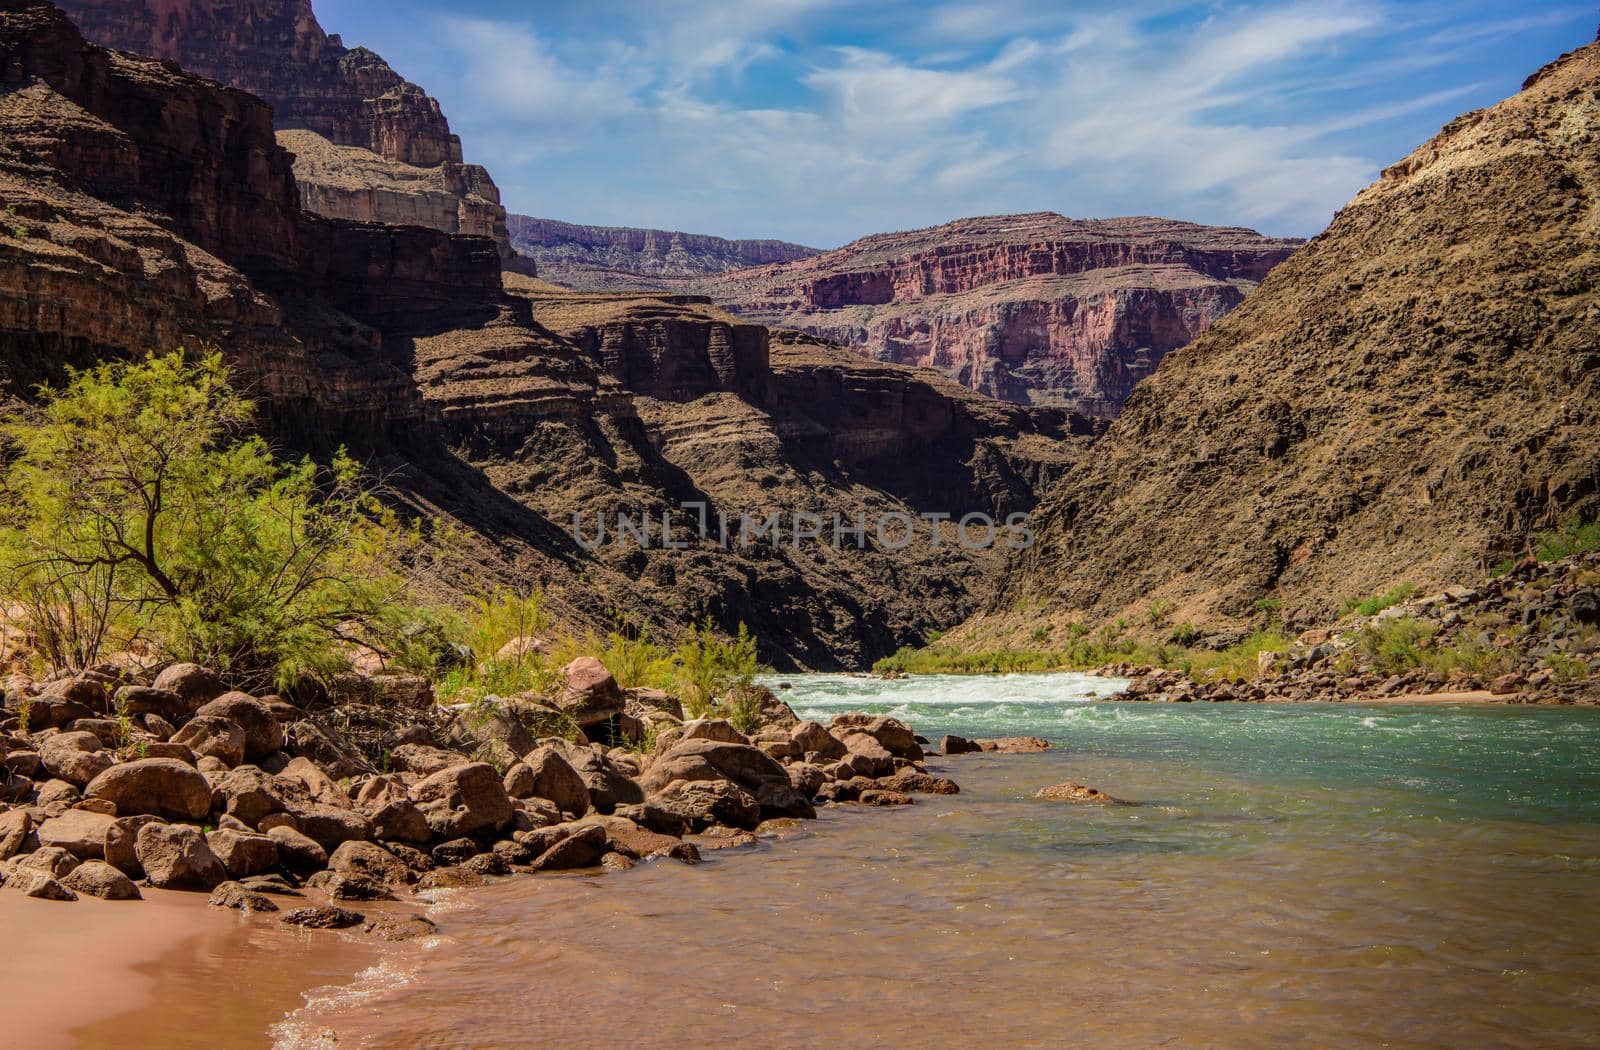 Colorado River in The Grand Canyon by lisaldw